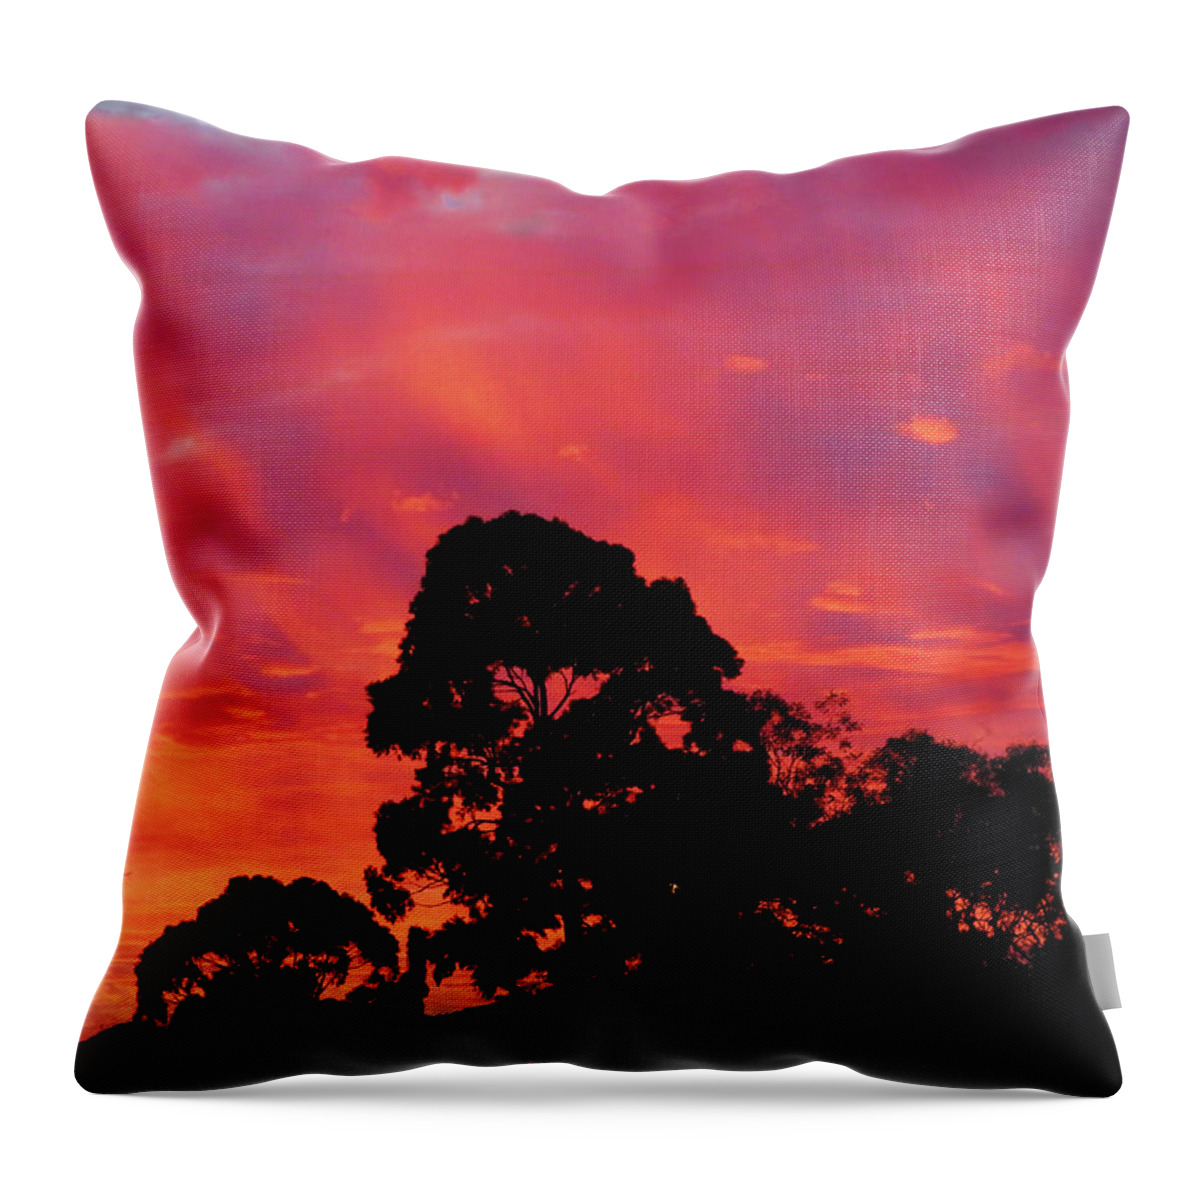 Sunrise Throw Pillow featuring the photograph Cool Sunrise by Mark Blauhoefer